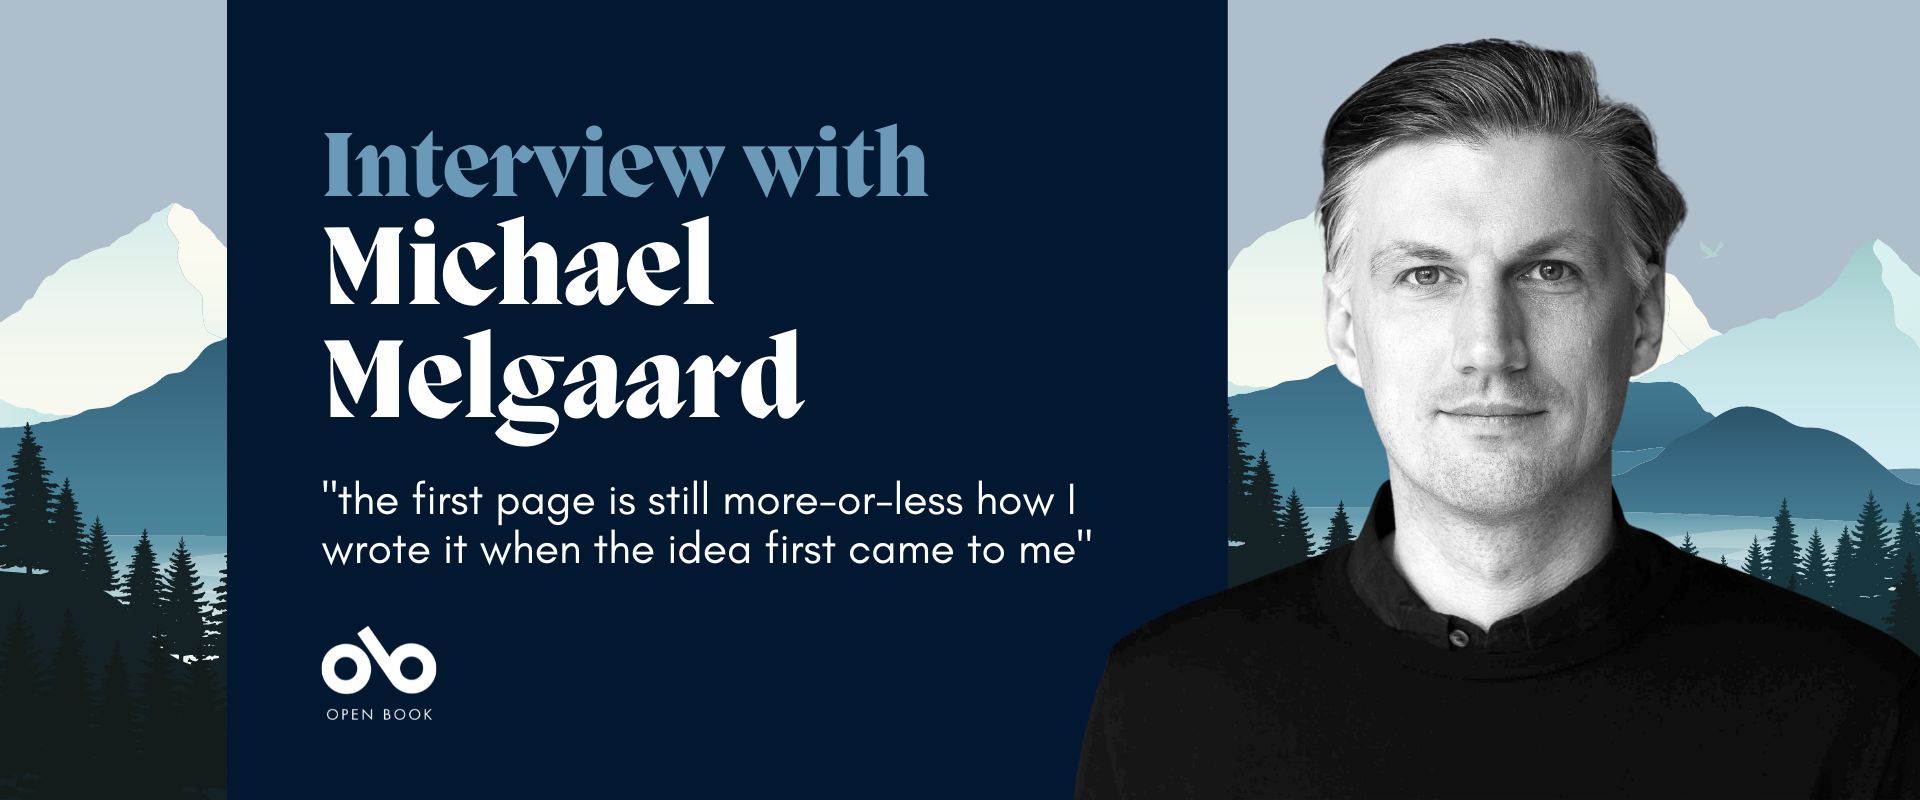 Dark blue banner image with trees outlined on the right and left sides. Text on the left reads "Interview with Michael Melgaard. the first page is still more-or-less how I wrote it when the idea first came to me" Open Book logo bottom left. photo of author Michael Melgaard on the right